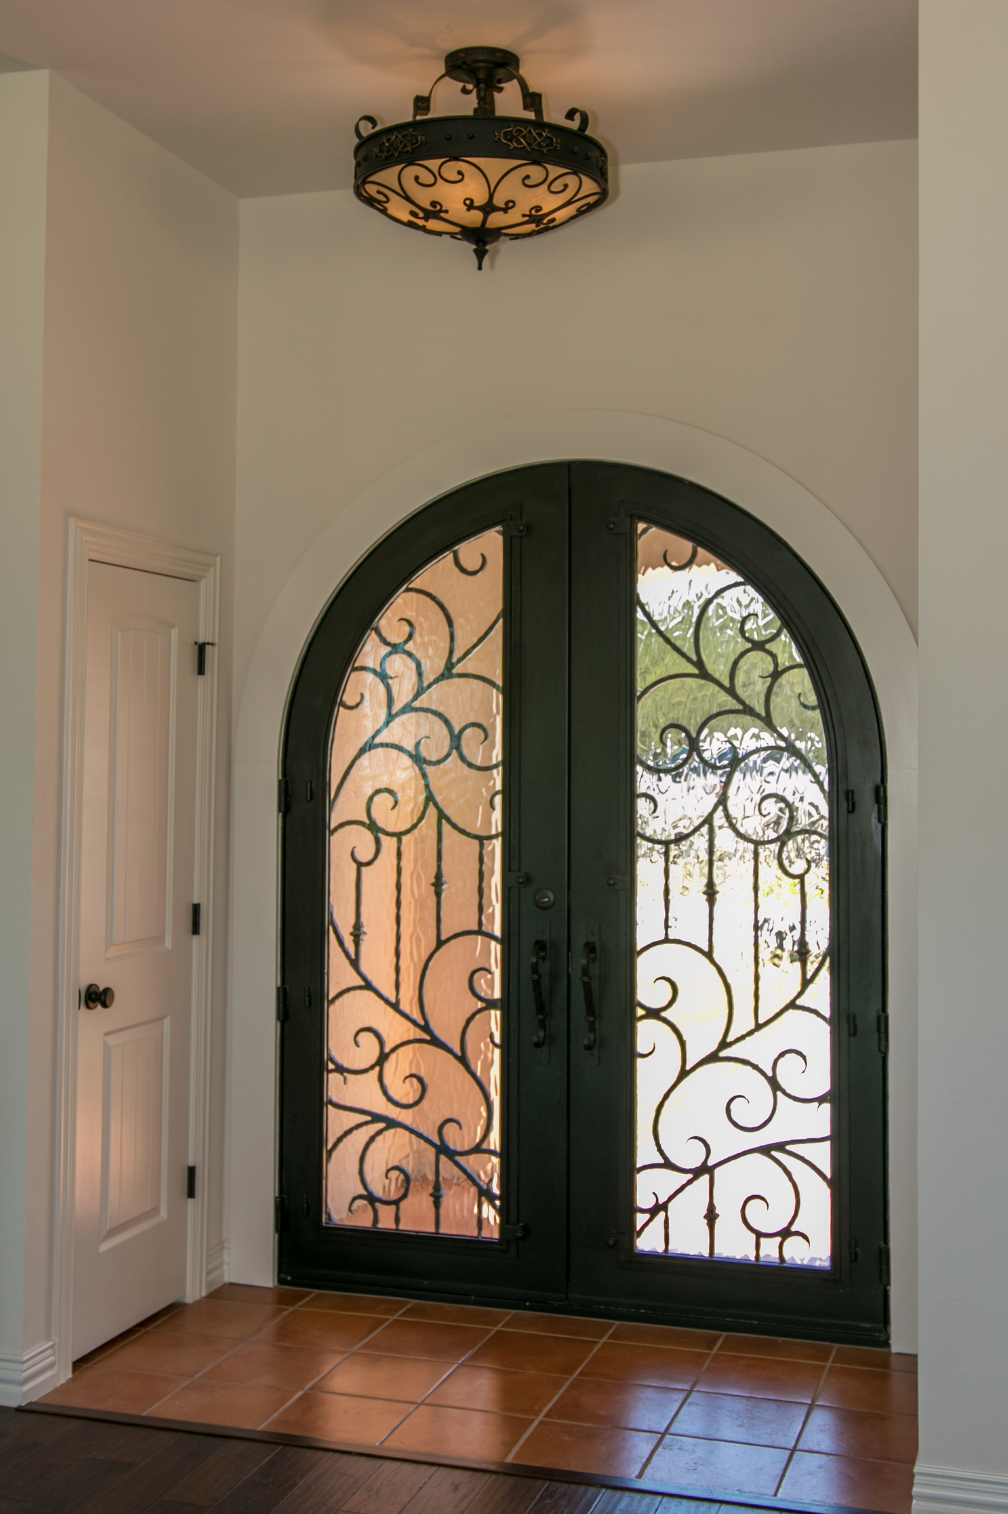 A wrought iron door with a chandelier above it